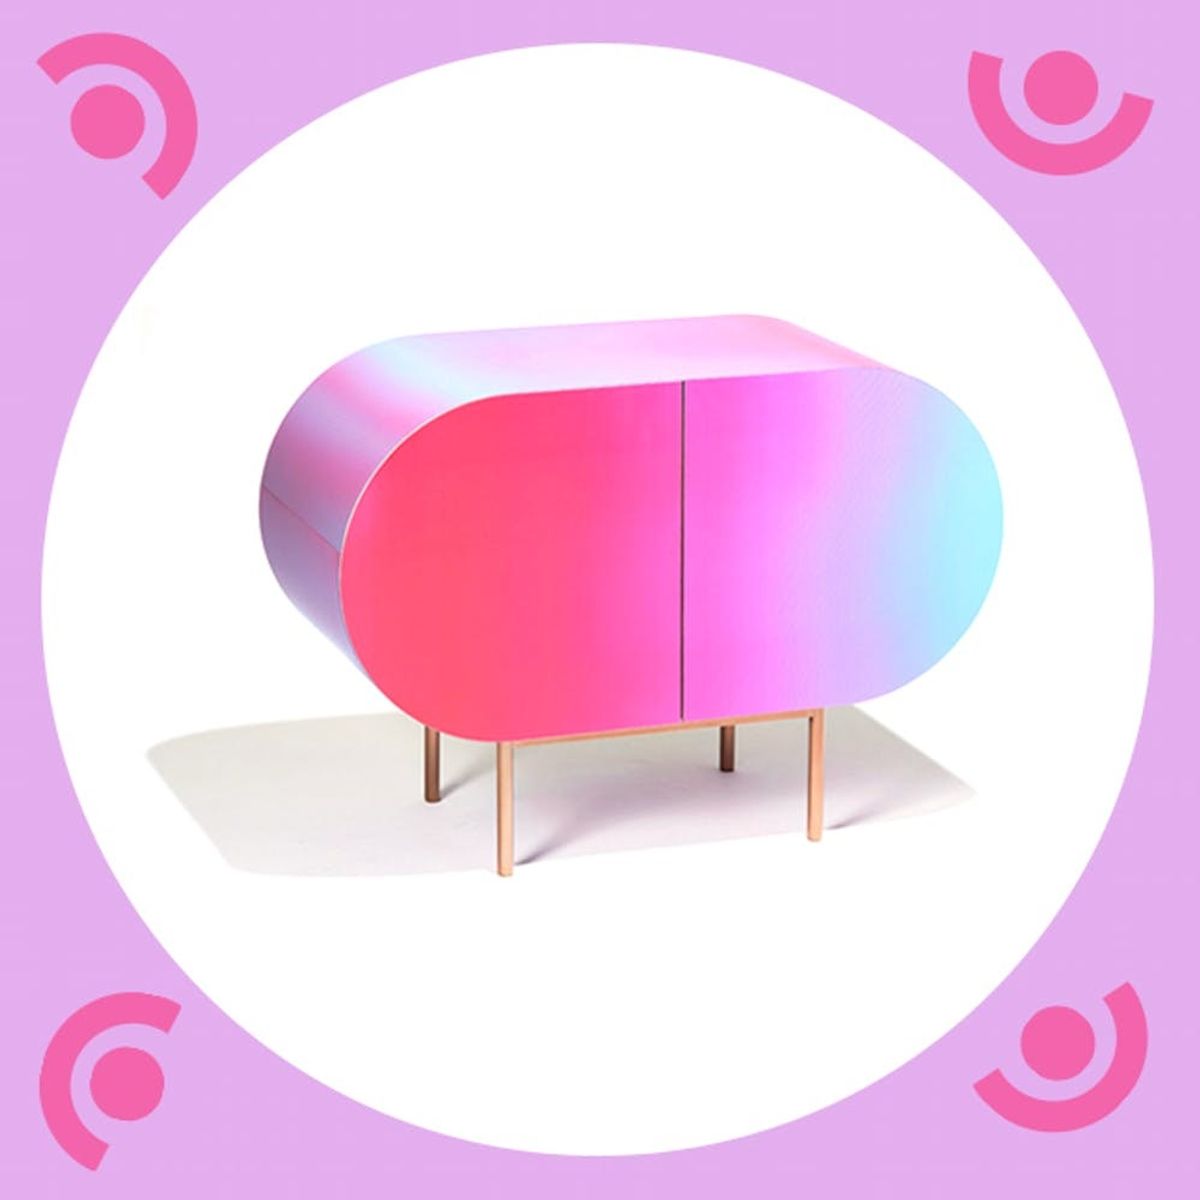 This Color-Changing Furniture Is the Only Thing We Want for Christmas This Year